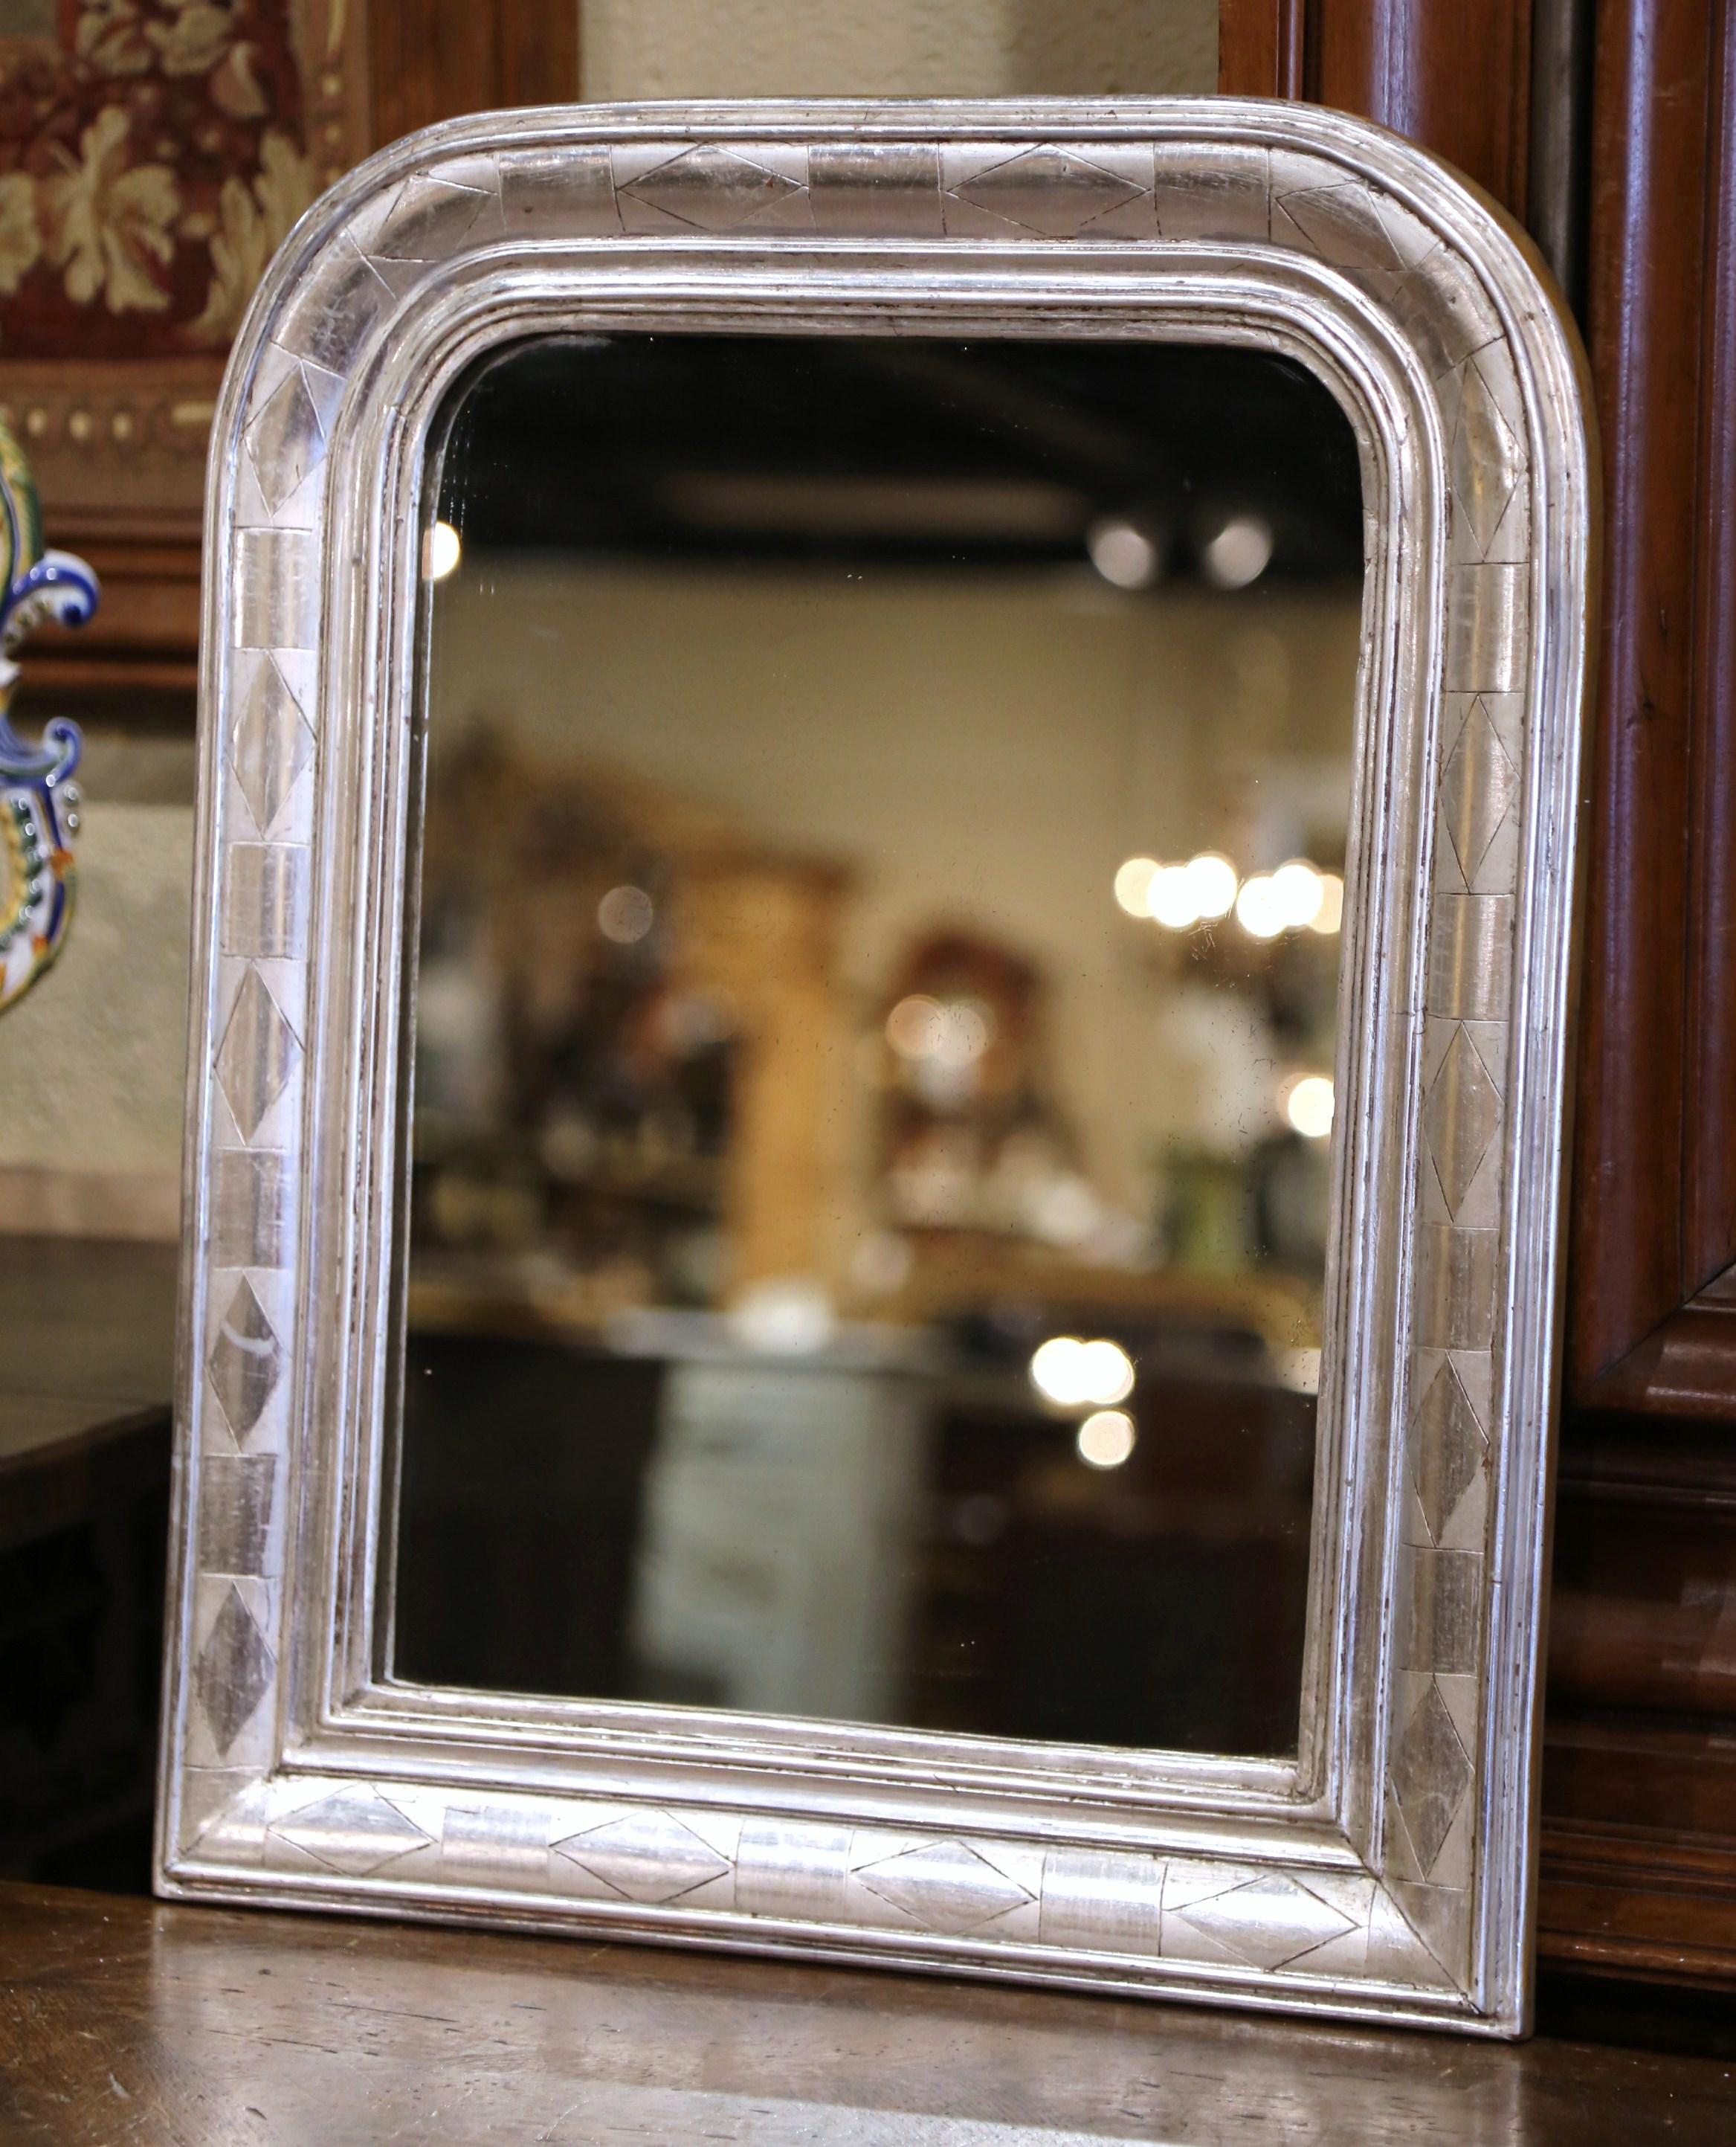 Crafted in the Burgundy region of France, circa 1870, the petite antique mirror has traditional, timeless lines with rounded corners. The elegant frame is decorated with a luxurious silver leaf finish, further embellished with an engraved two-tone